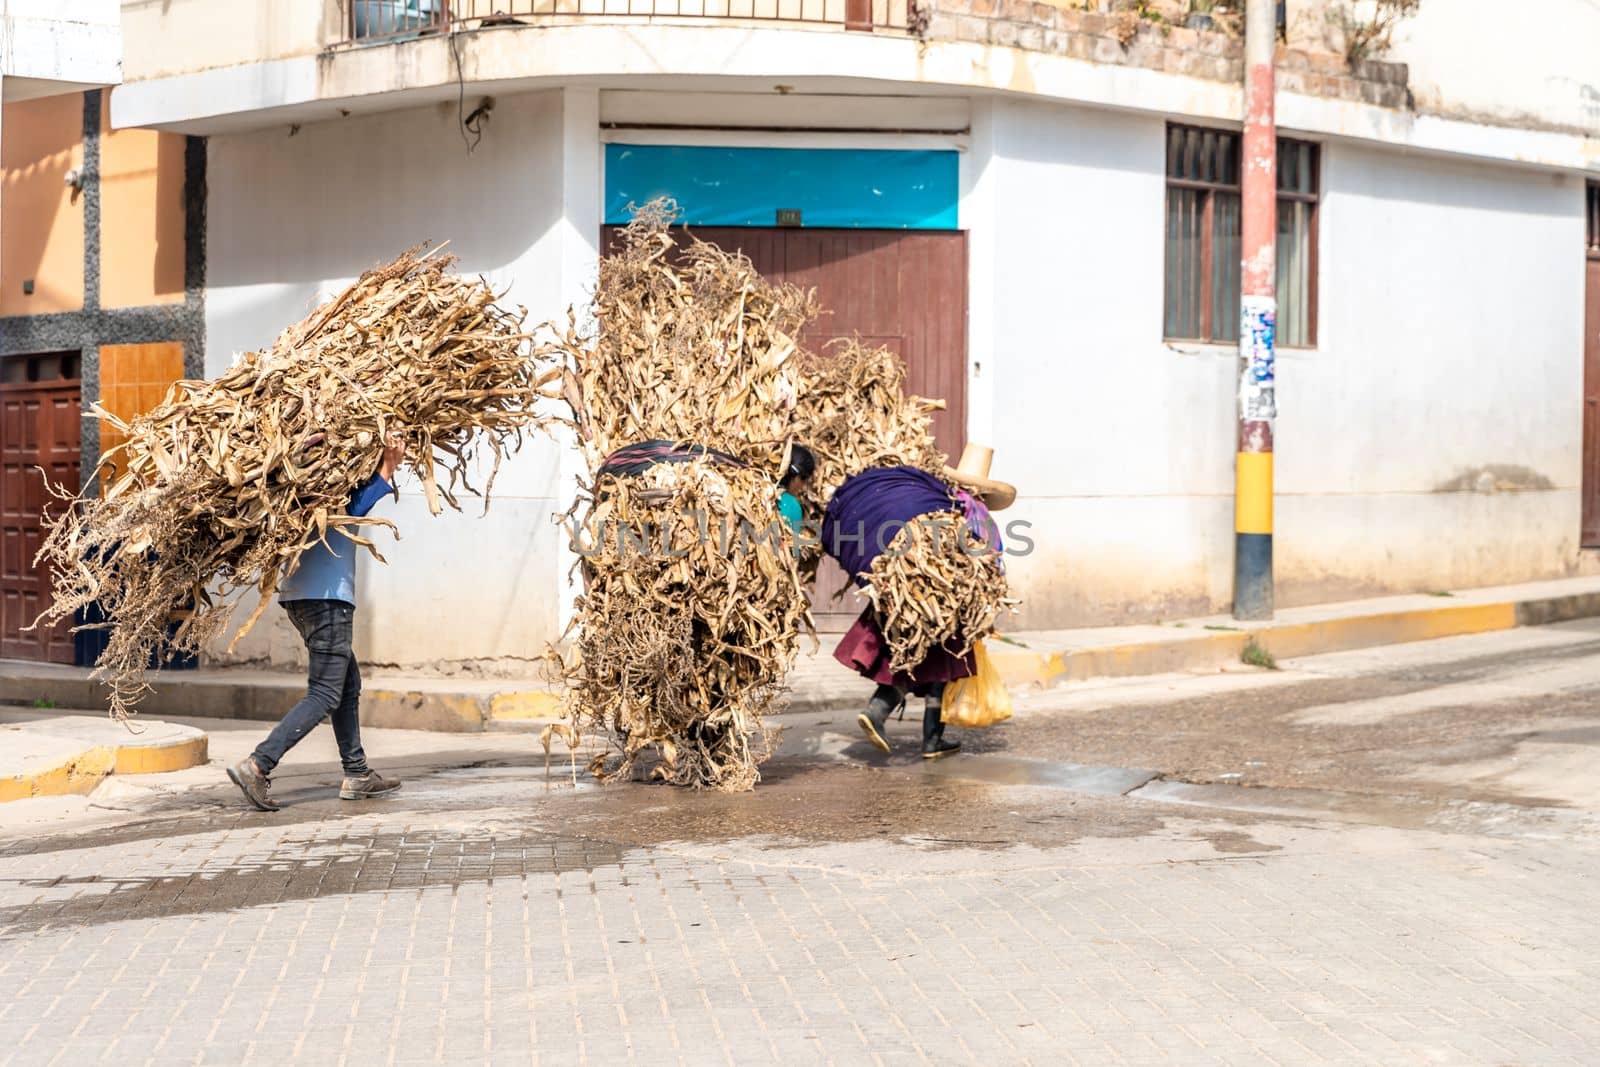 people carry bales of straw on their backs down the street by Edophoto